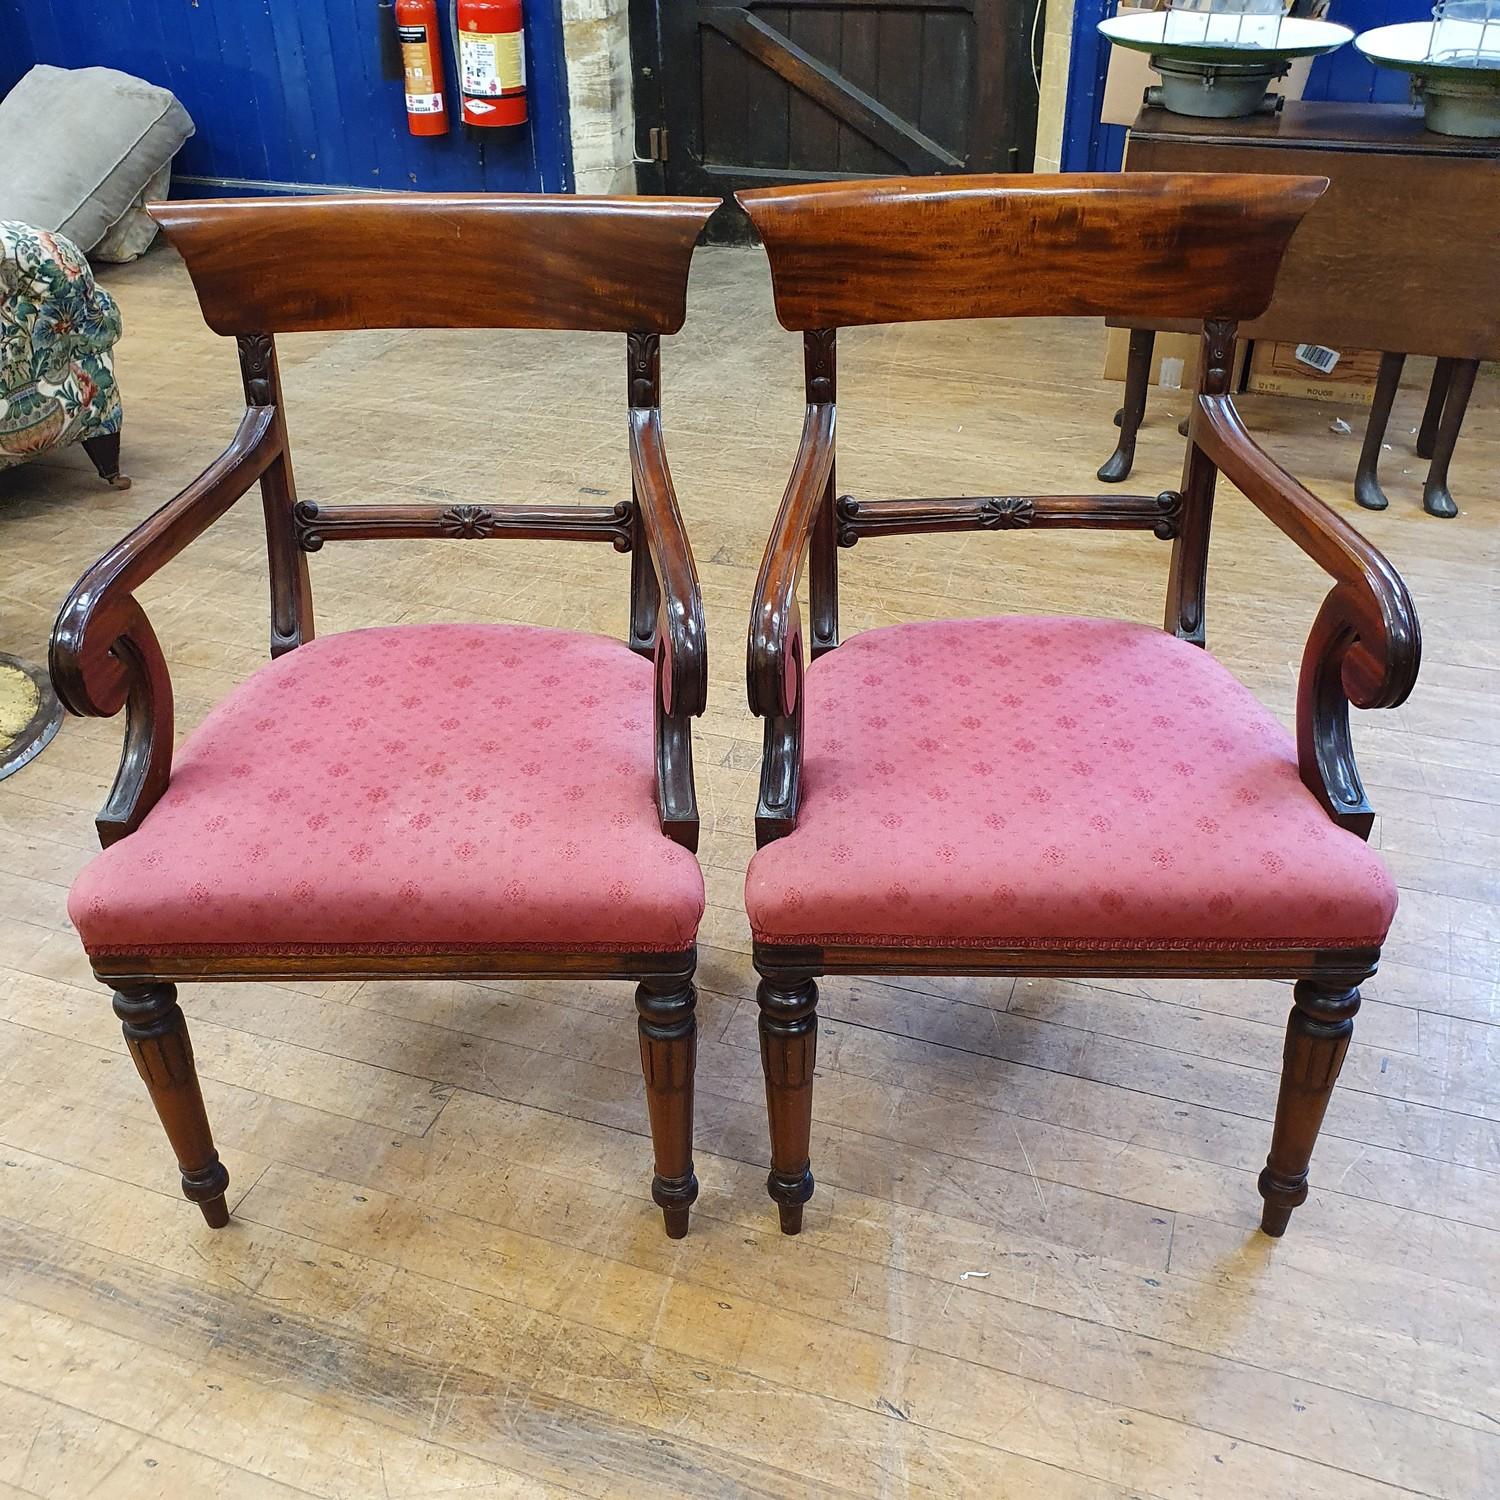 A pair of 19th century style mahogany carver chairs (2) - Image 4 of 4